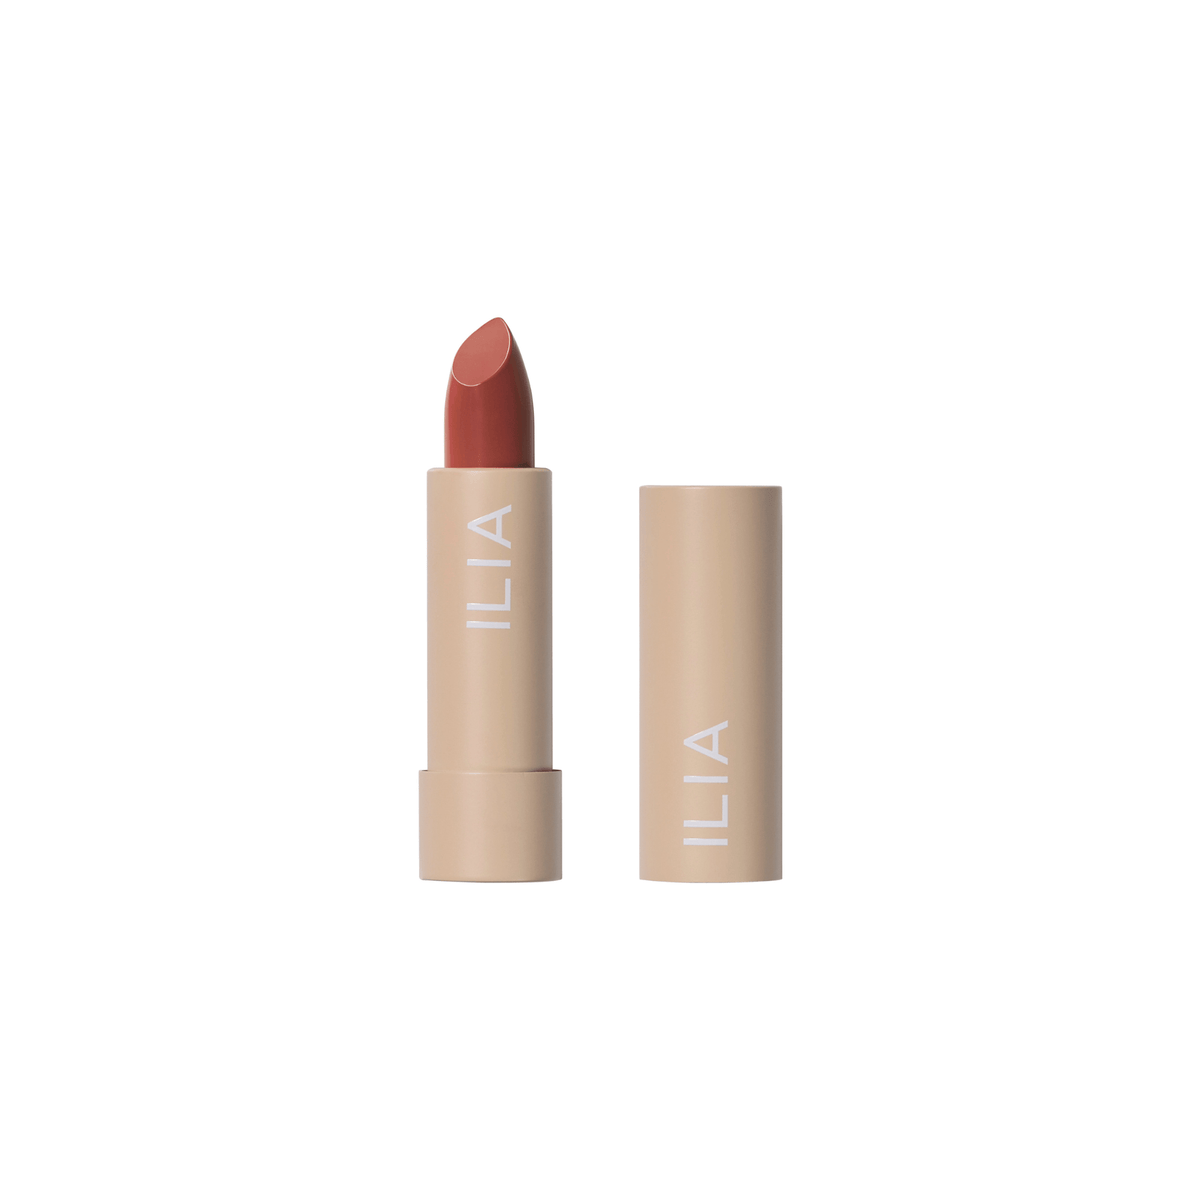 Primary image of Color Block High Impact Lipstick in Cinnabar